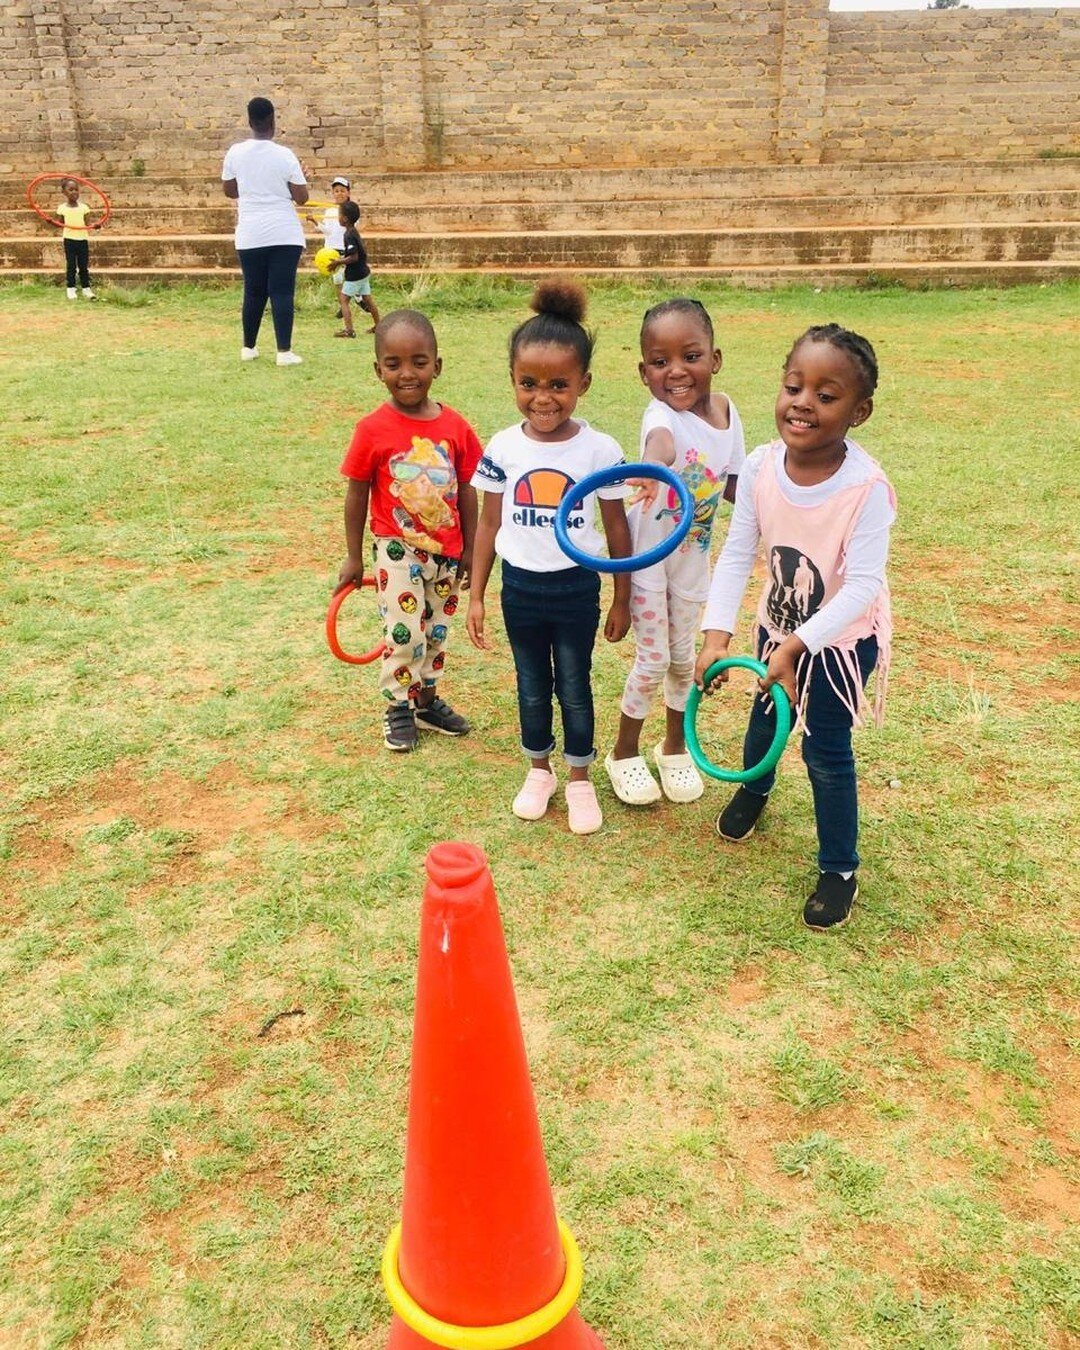 Sports Day at Athlolang Pre-School in Kagiso 🥰 All the toys and apparatus used in these activities, are from the toy libraries, donated by ASAP.
#asap #adoptasouthafricanpreschool #educationaltoys #pen #daycare #preschools #care #educationforall